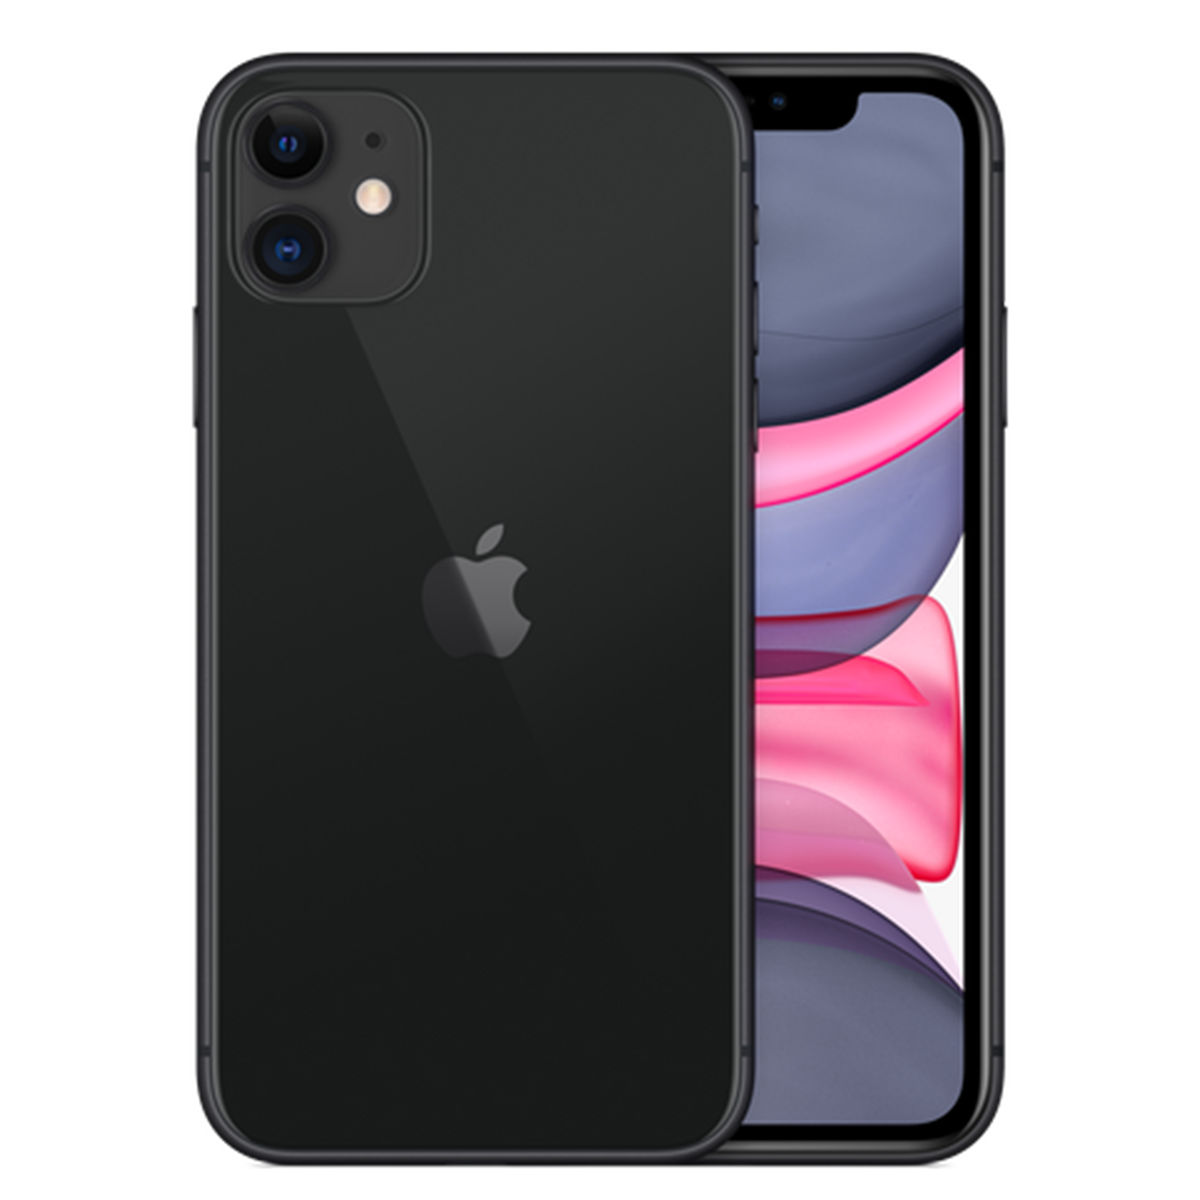 iPhone 11, Black, 128GB (Official Stock)